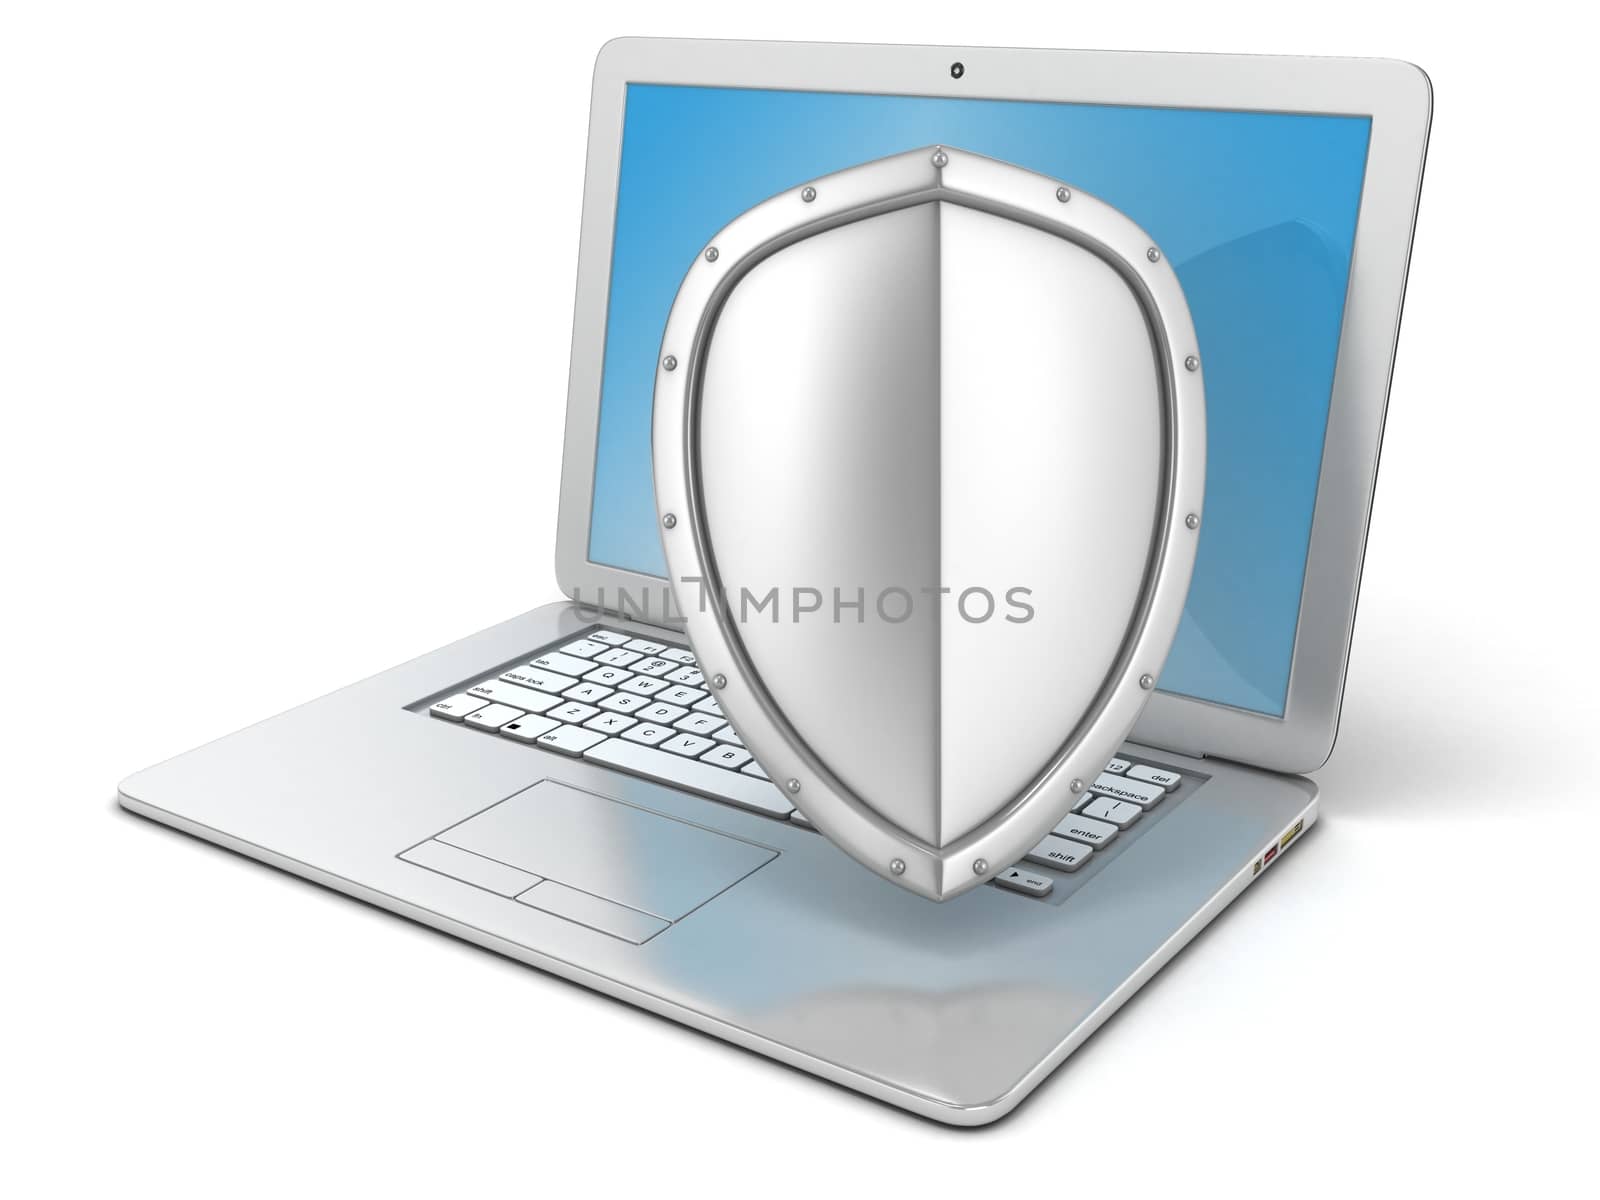 Shield covers laptop. Concept of information security. 3D render illustration isolated on white background